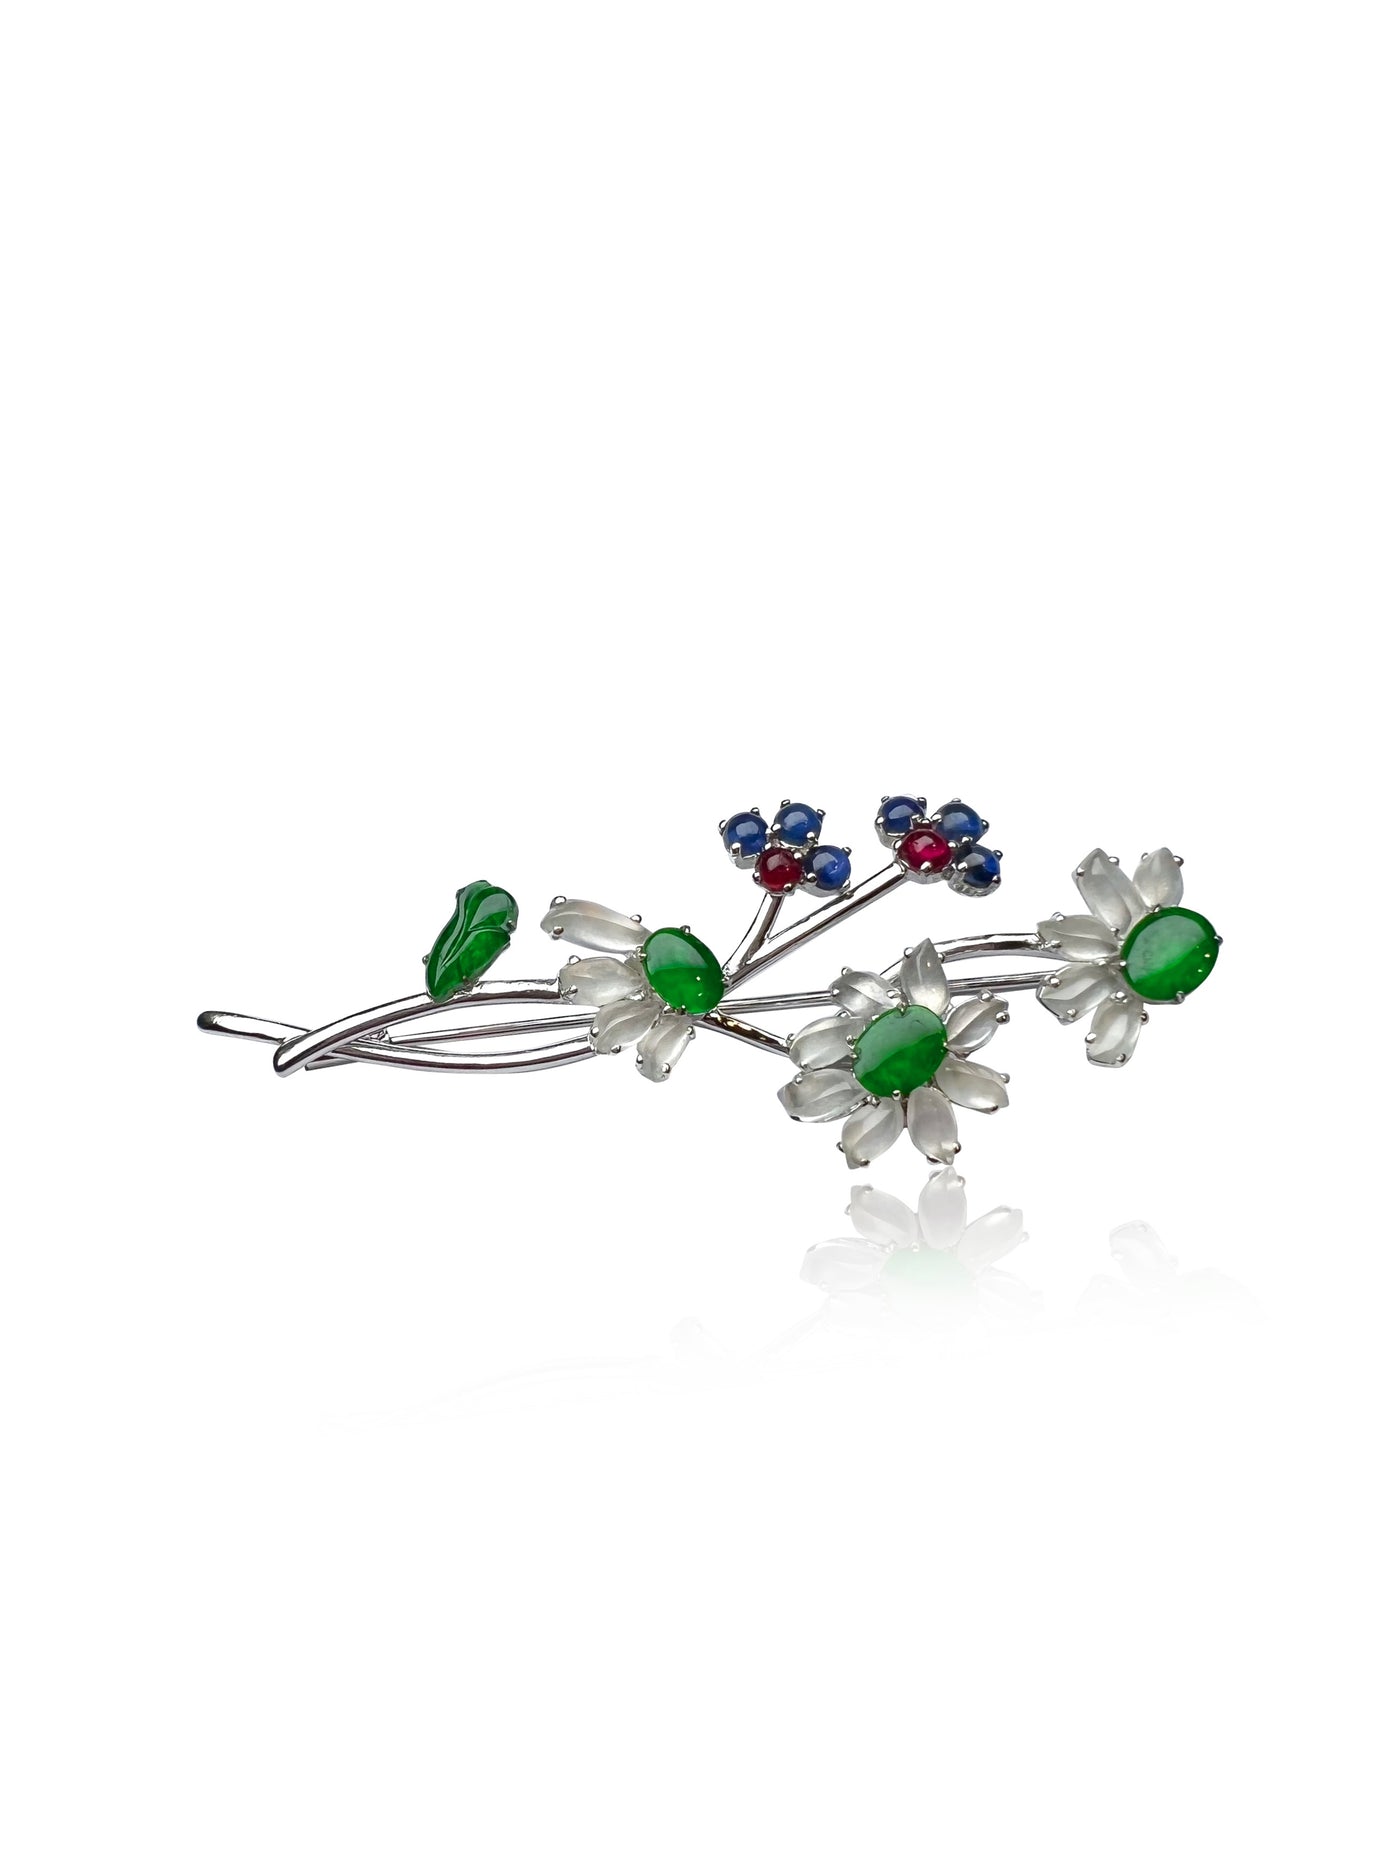 SUN FLOWER JADEITE BROOCH IN 18K WHITE GOLD WITH RUBY AND SAPPHIRE